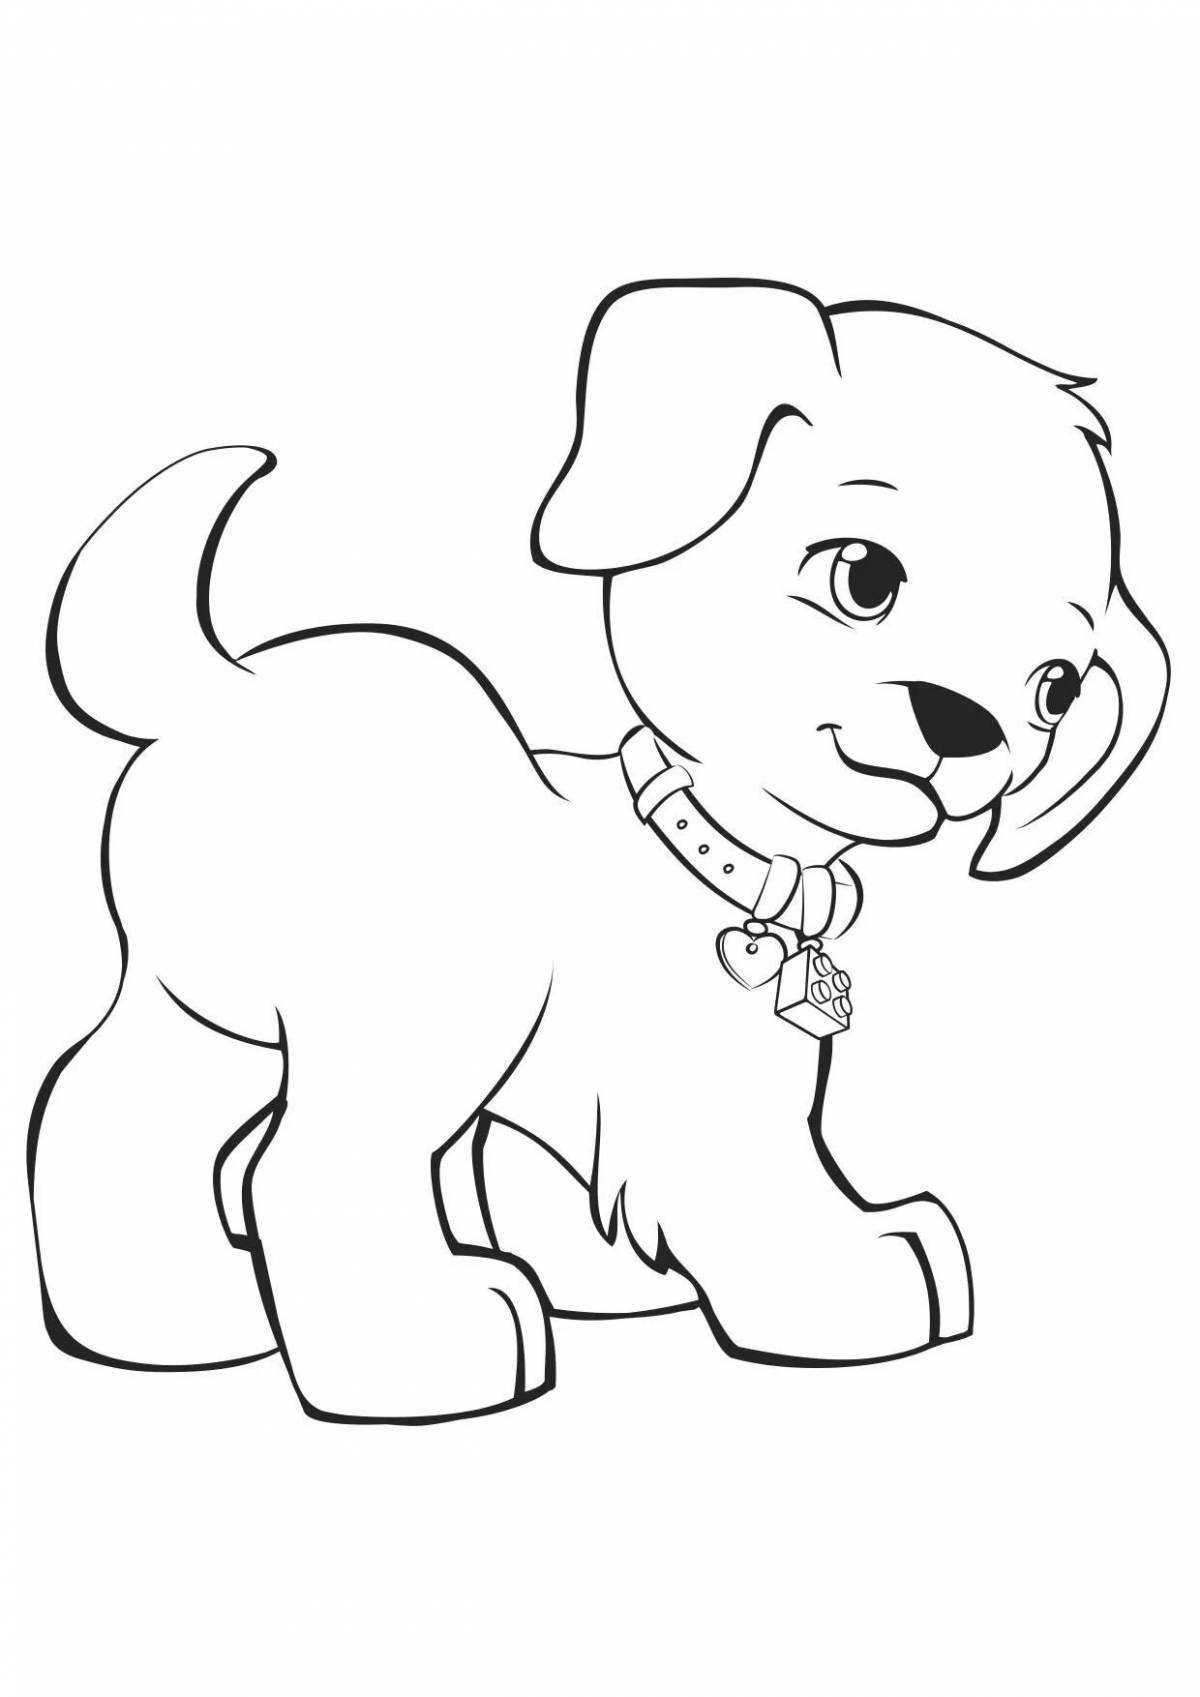 Curious puppies coloring pages for girls